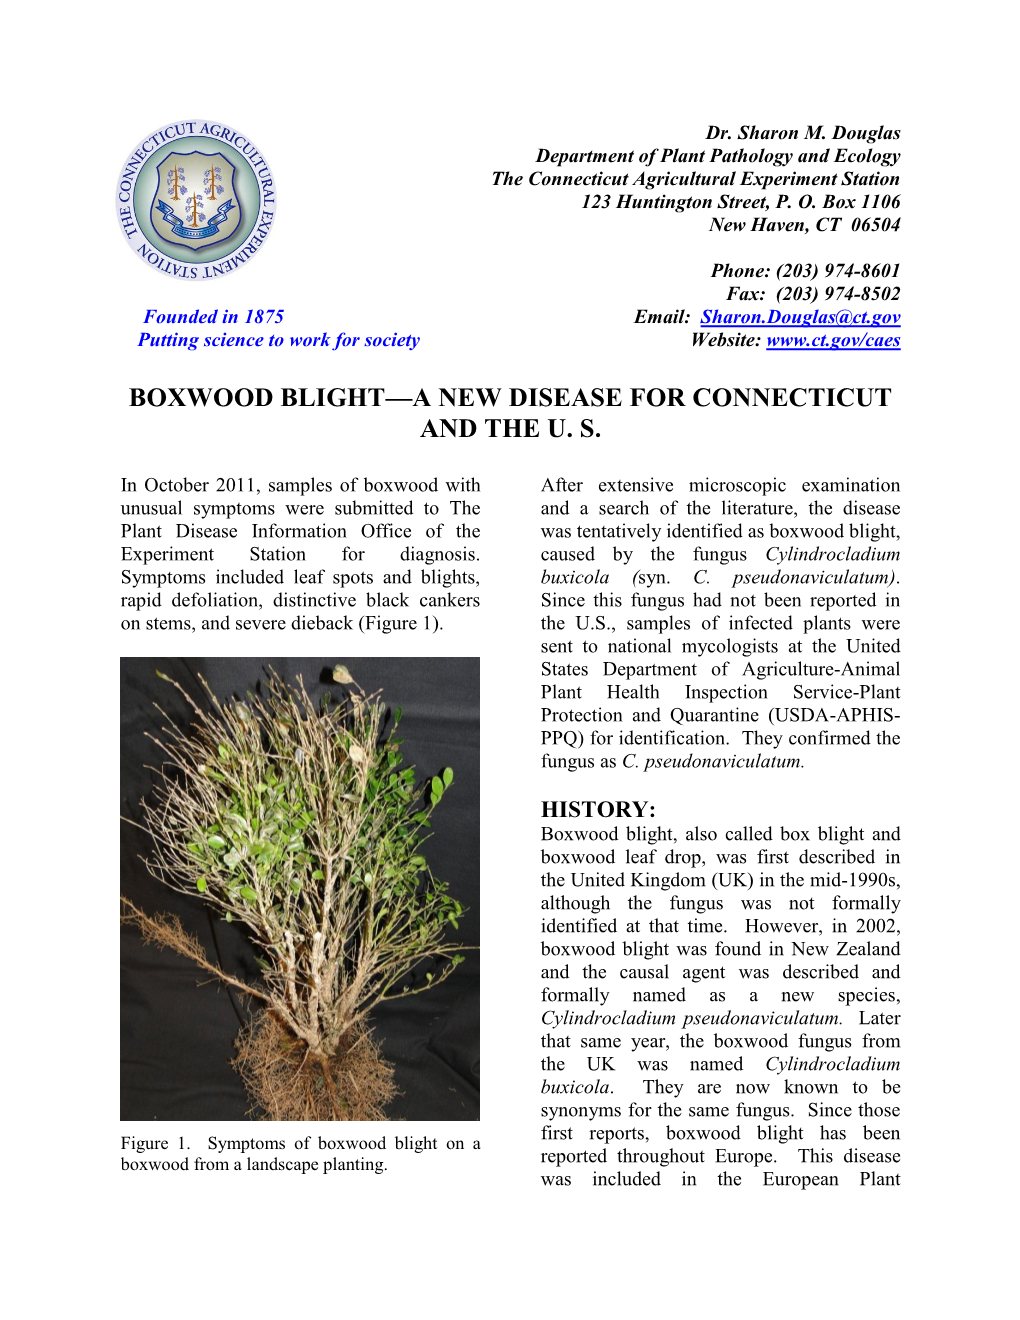 Boxwood Blight—A New Disease for Connecticut and the U